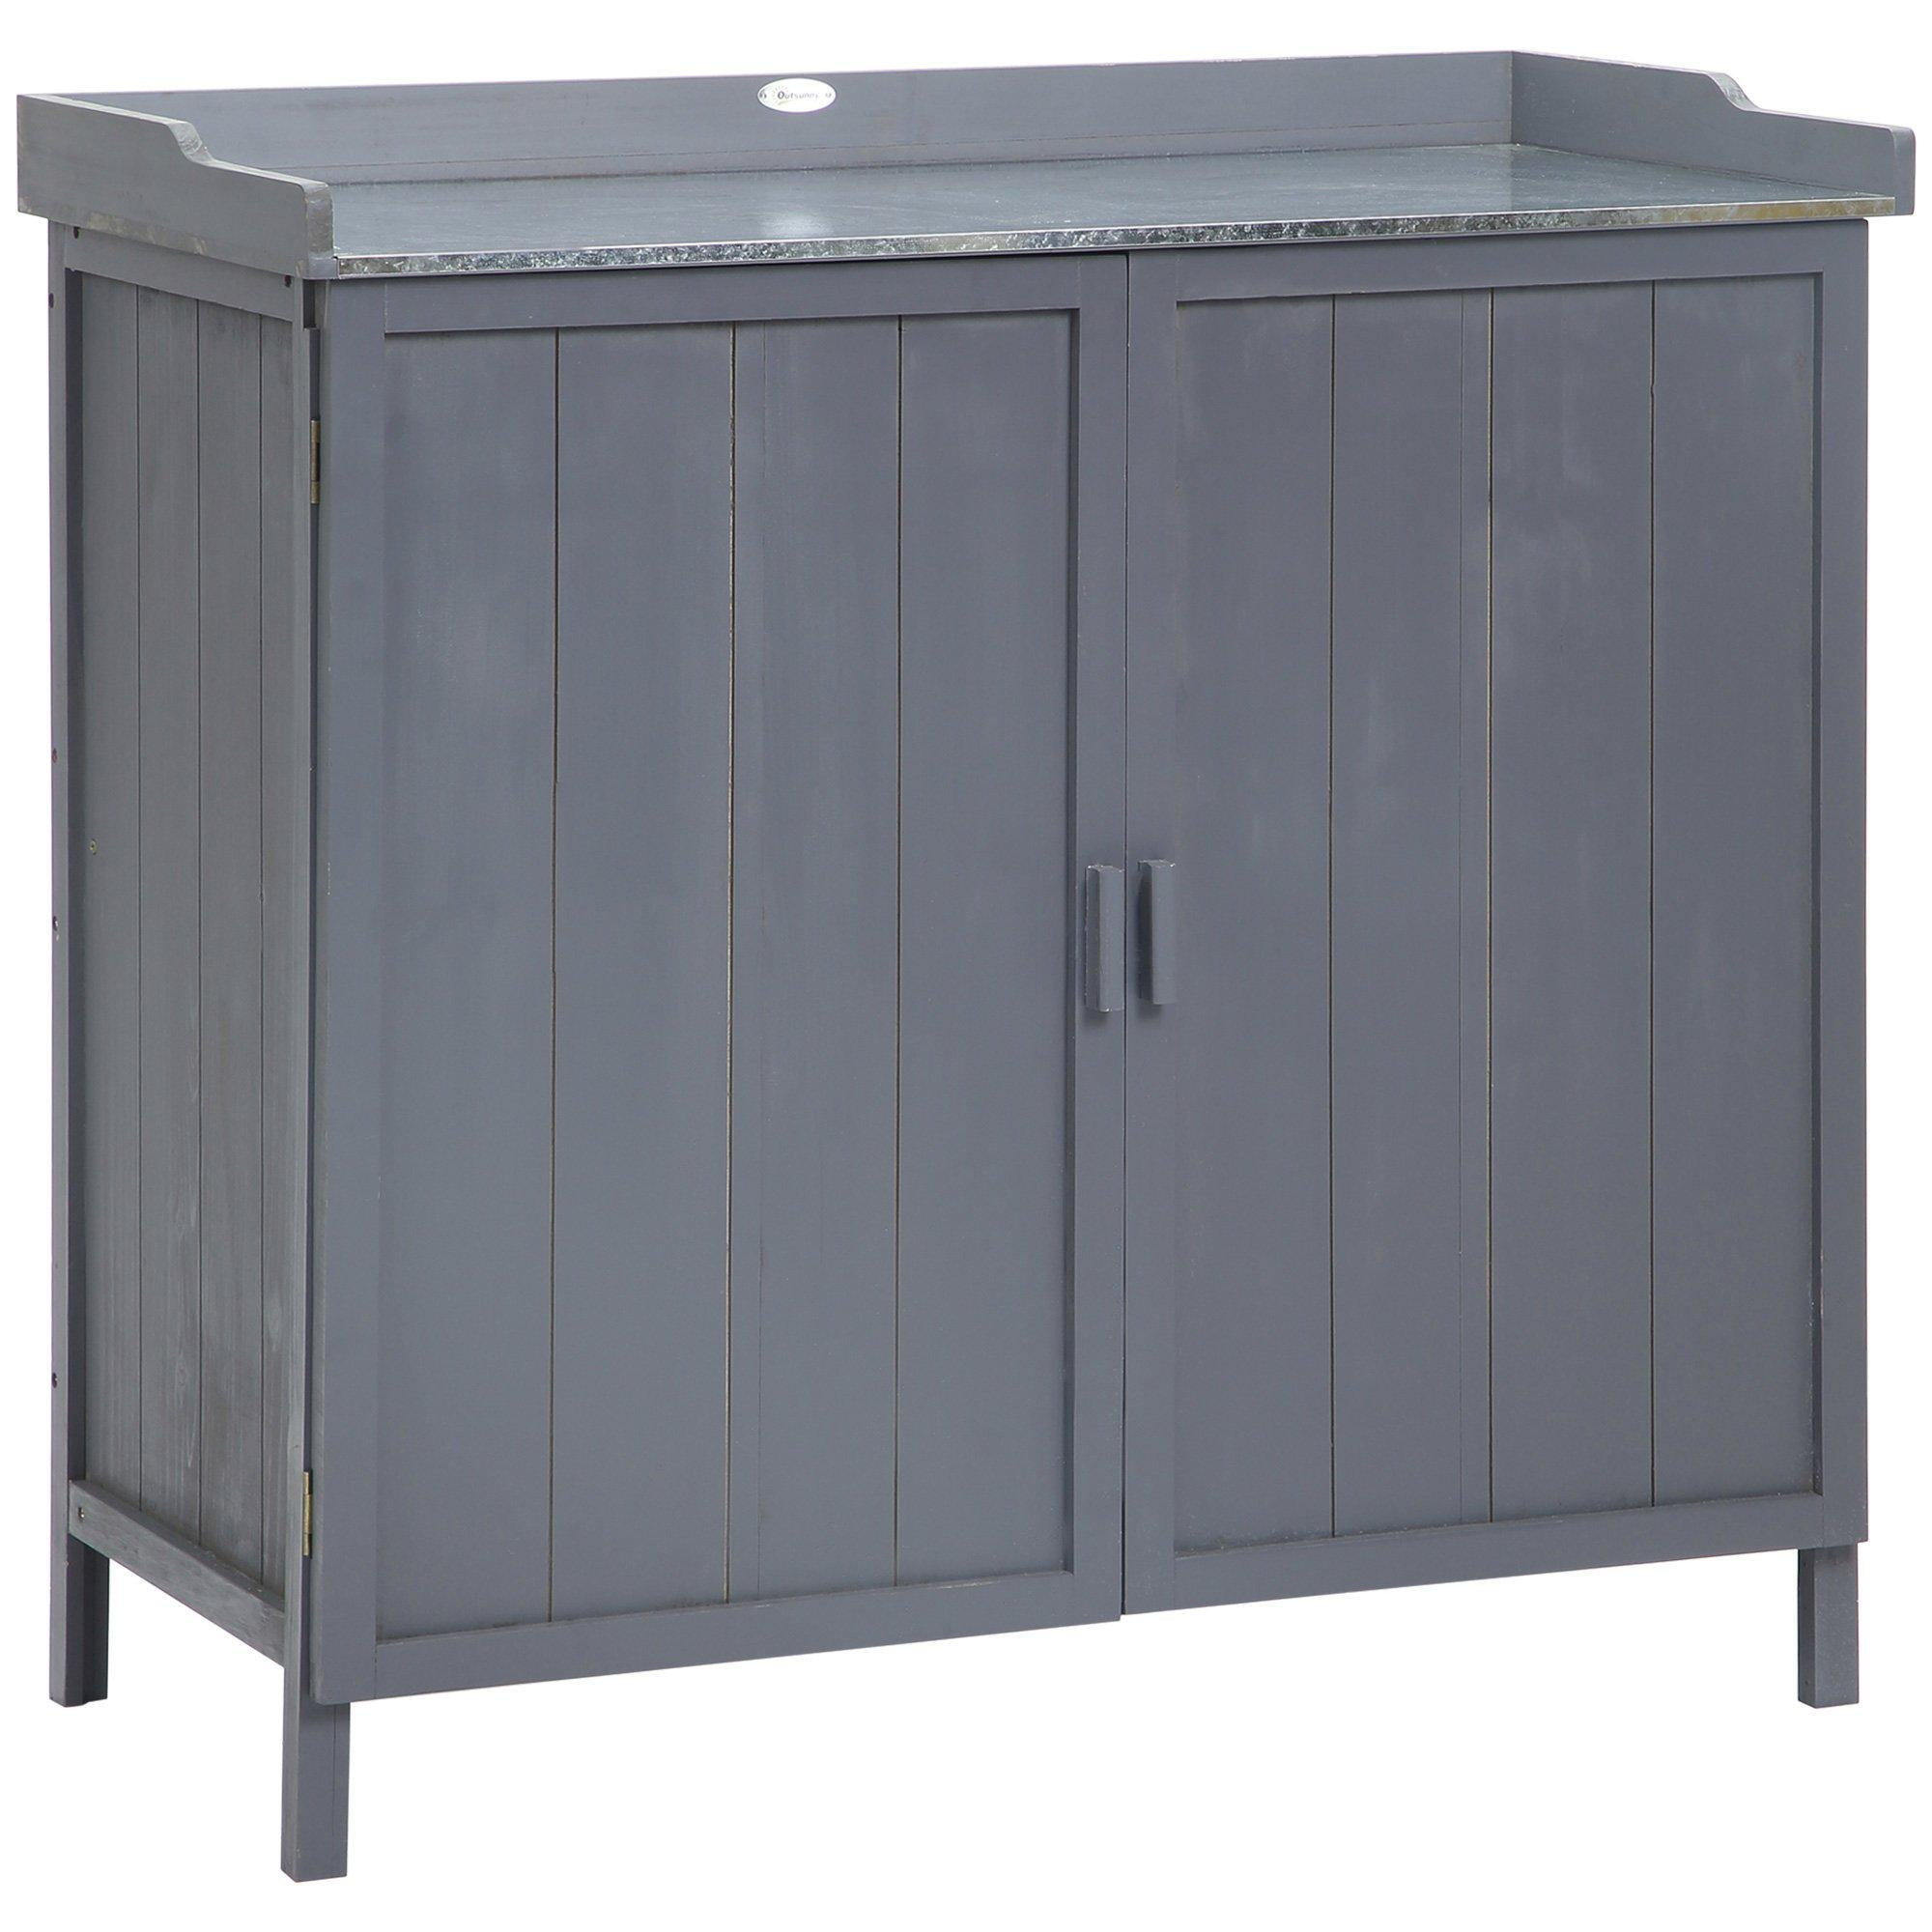 Garden Storage Cabinet Potting Bench Table with Galvanized Top - image 1